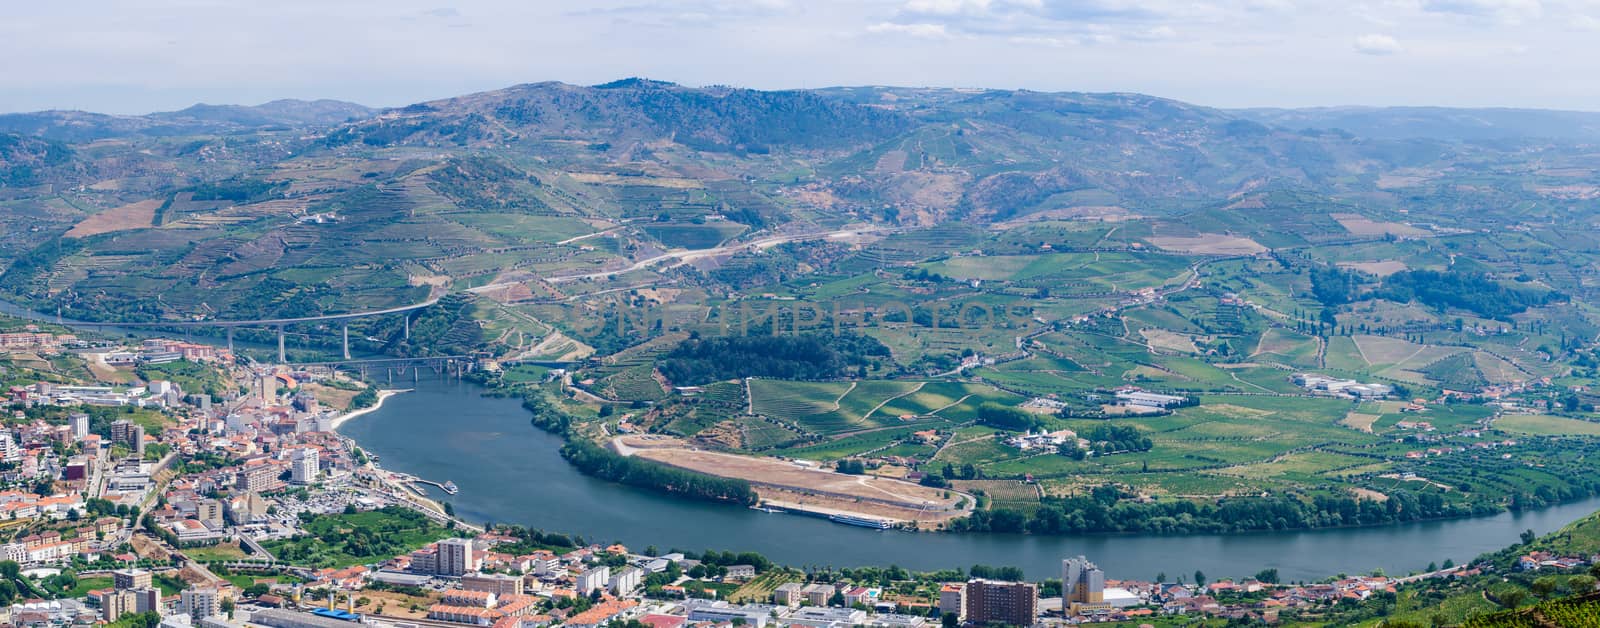 Regua, Terraced vineyards in Douro Valley, Alto Douro Wine Region in northern Portugal, officially designated by UNESCO as World Heritage Site